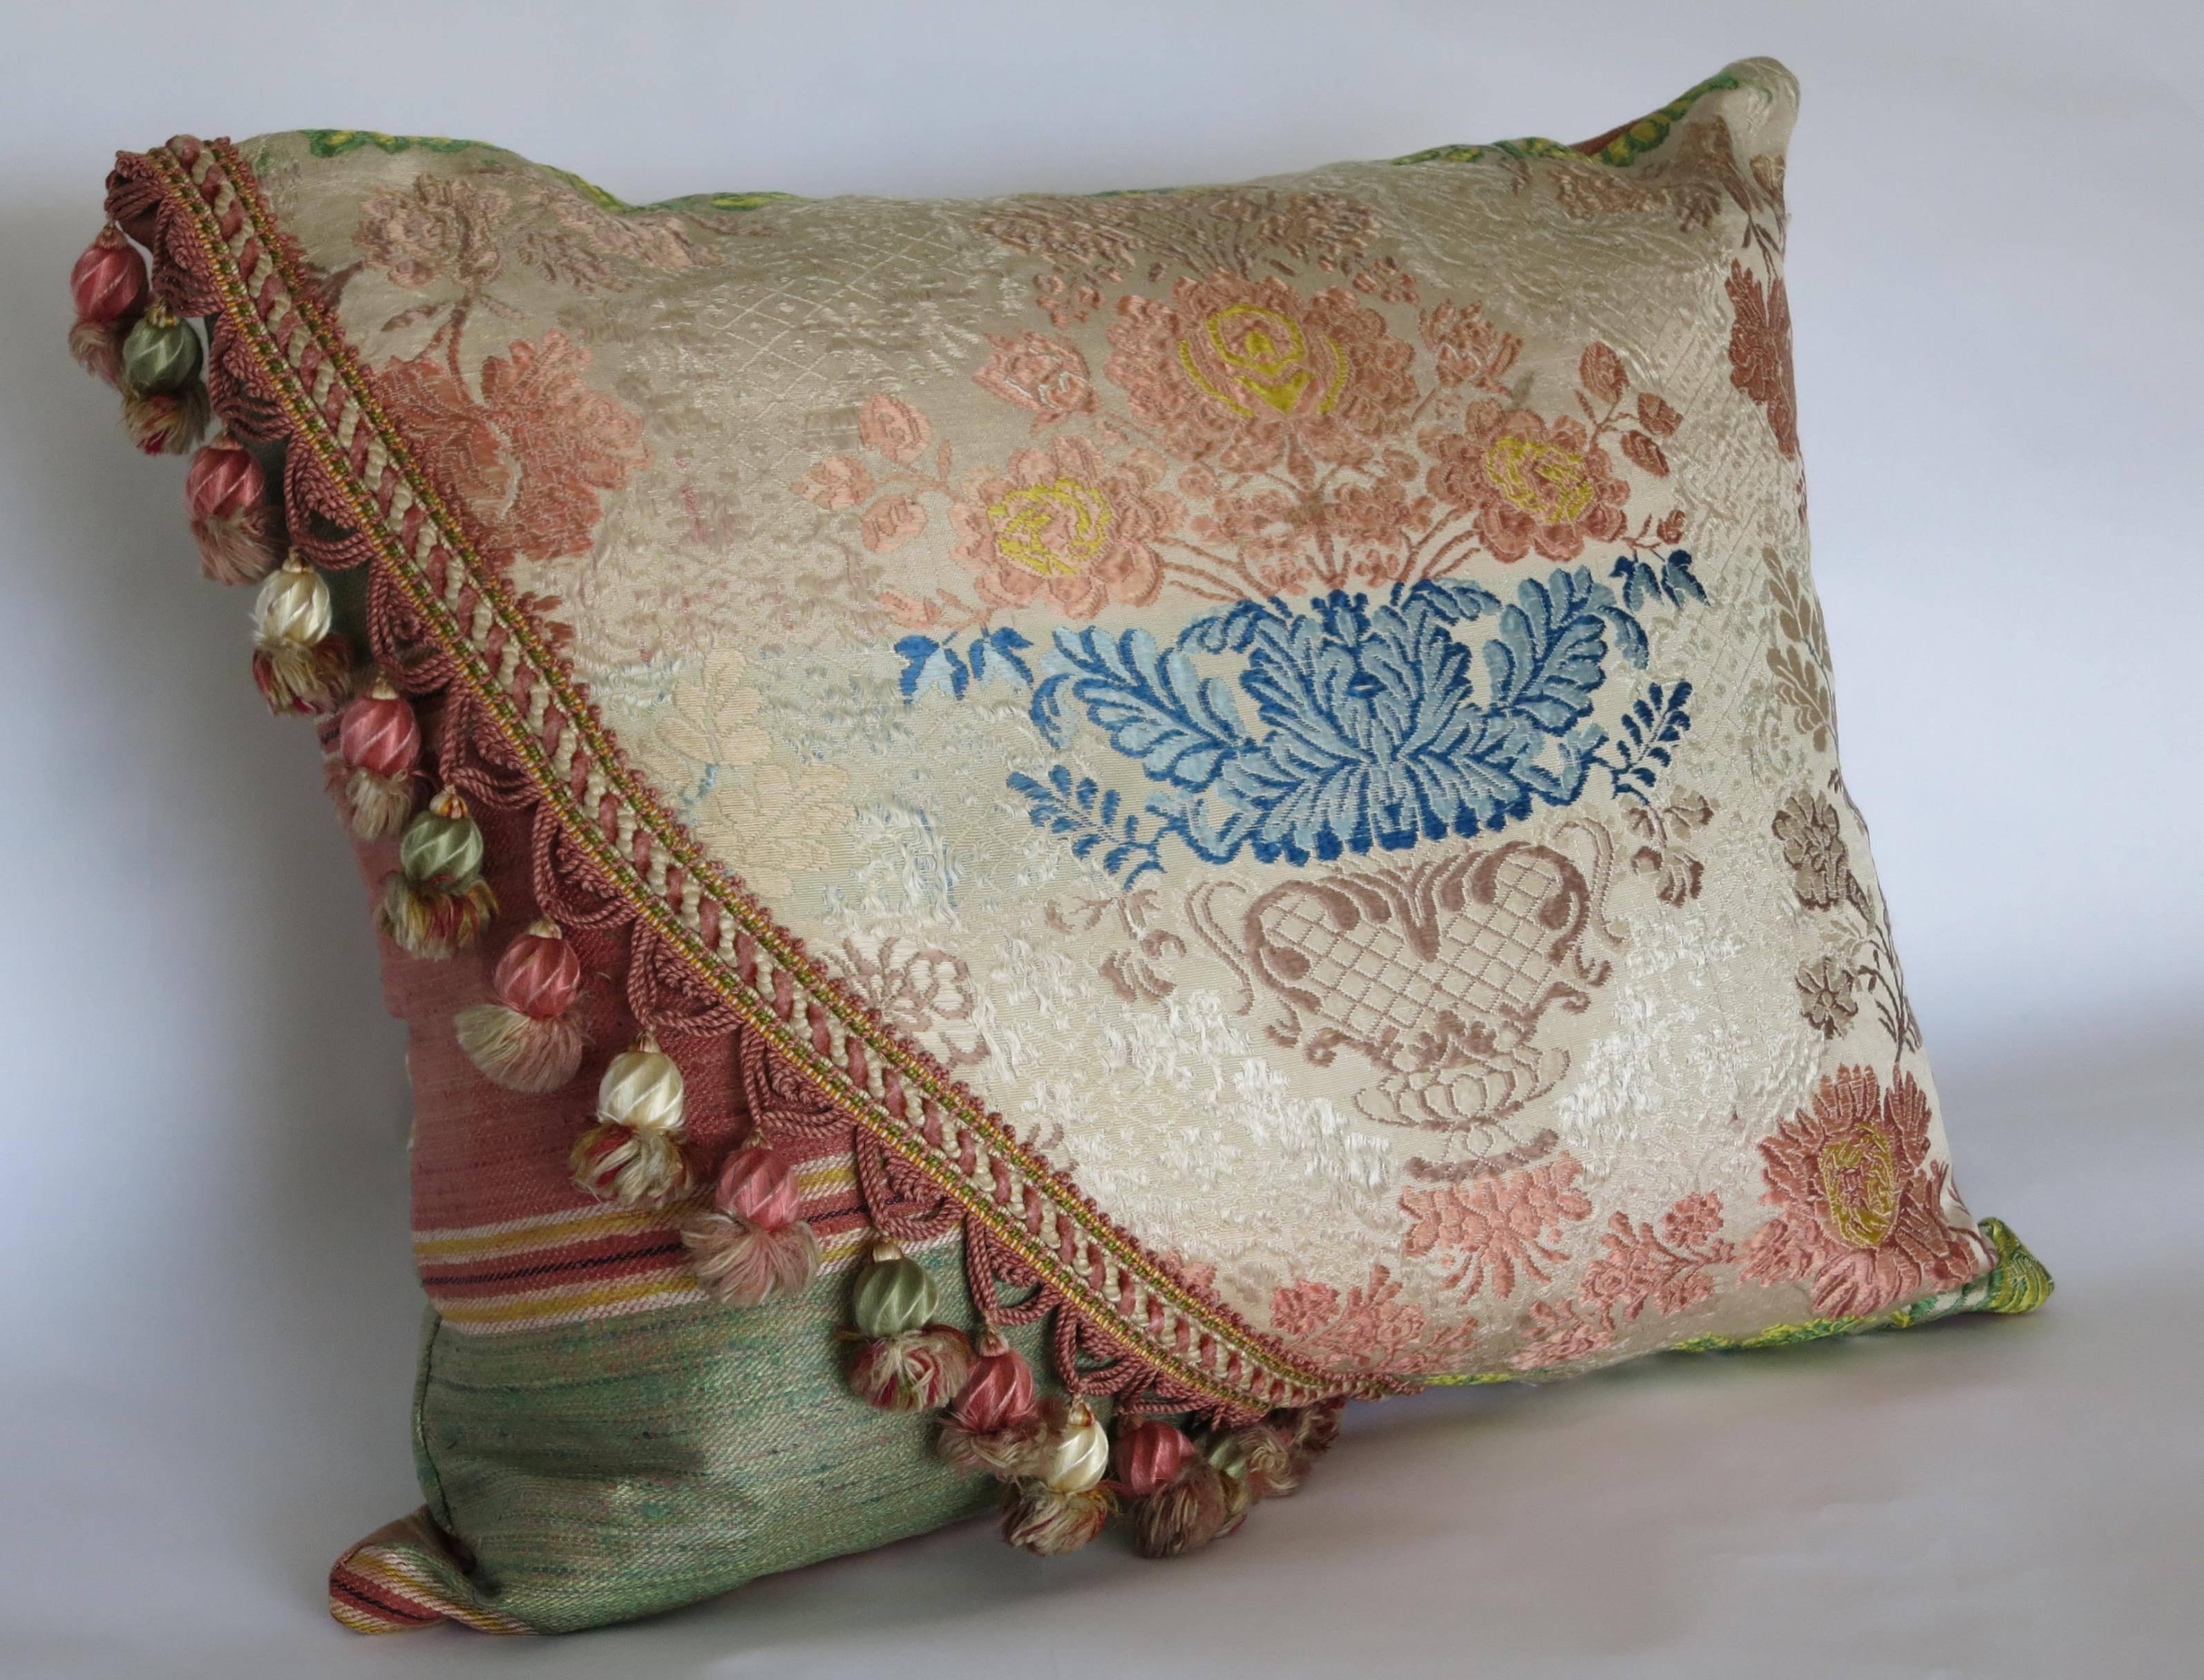 Hand-Crafted 18th Century French Silk Textile Pillow With Tassels